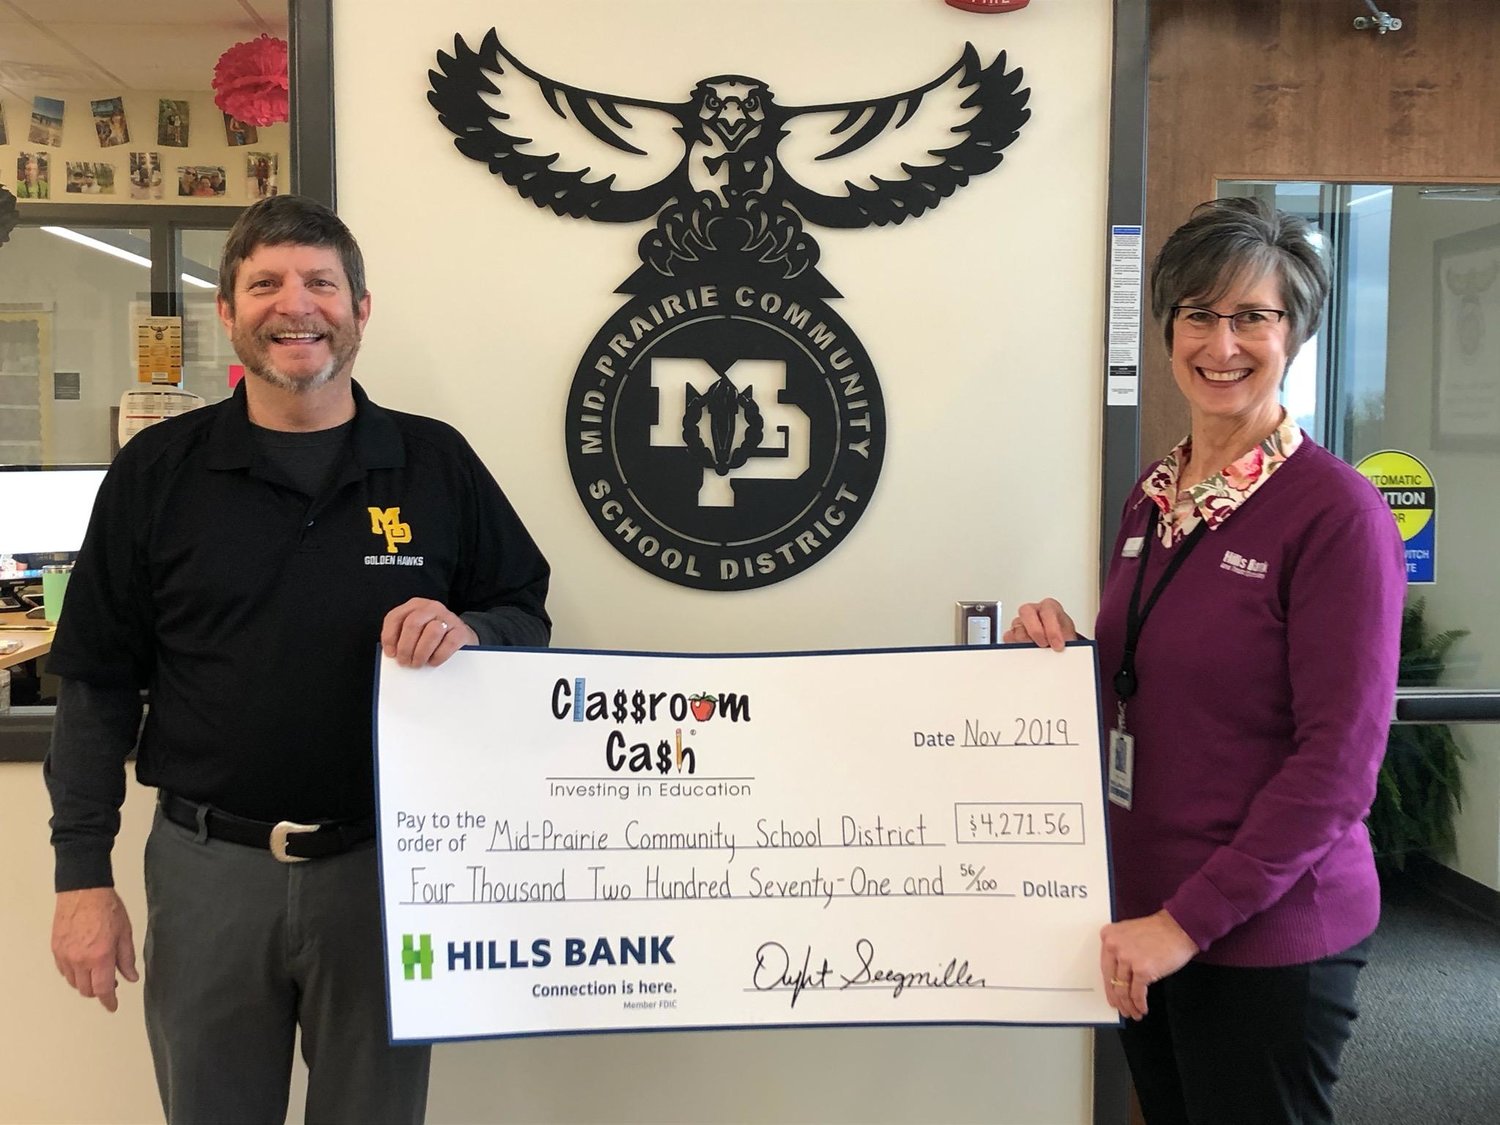 Kris Burns (right) from Hills Bank presents Mid-Prairie Superintendent Mark Schneider with a Classroom Cash check for $4,271.56. These funds will be used for staff professional development.